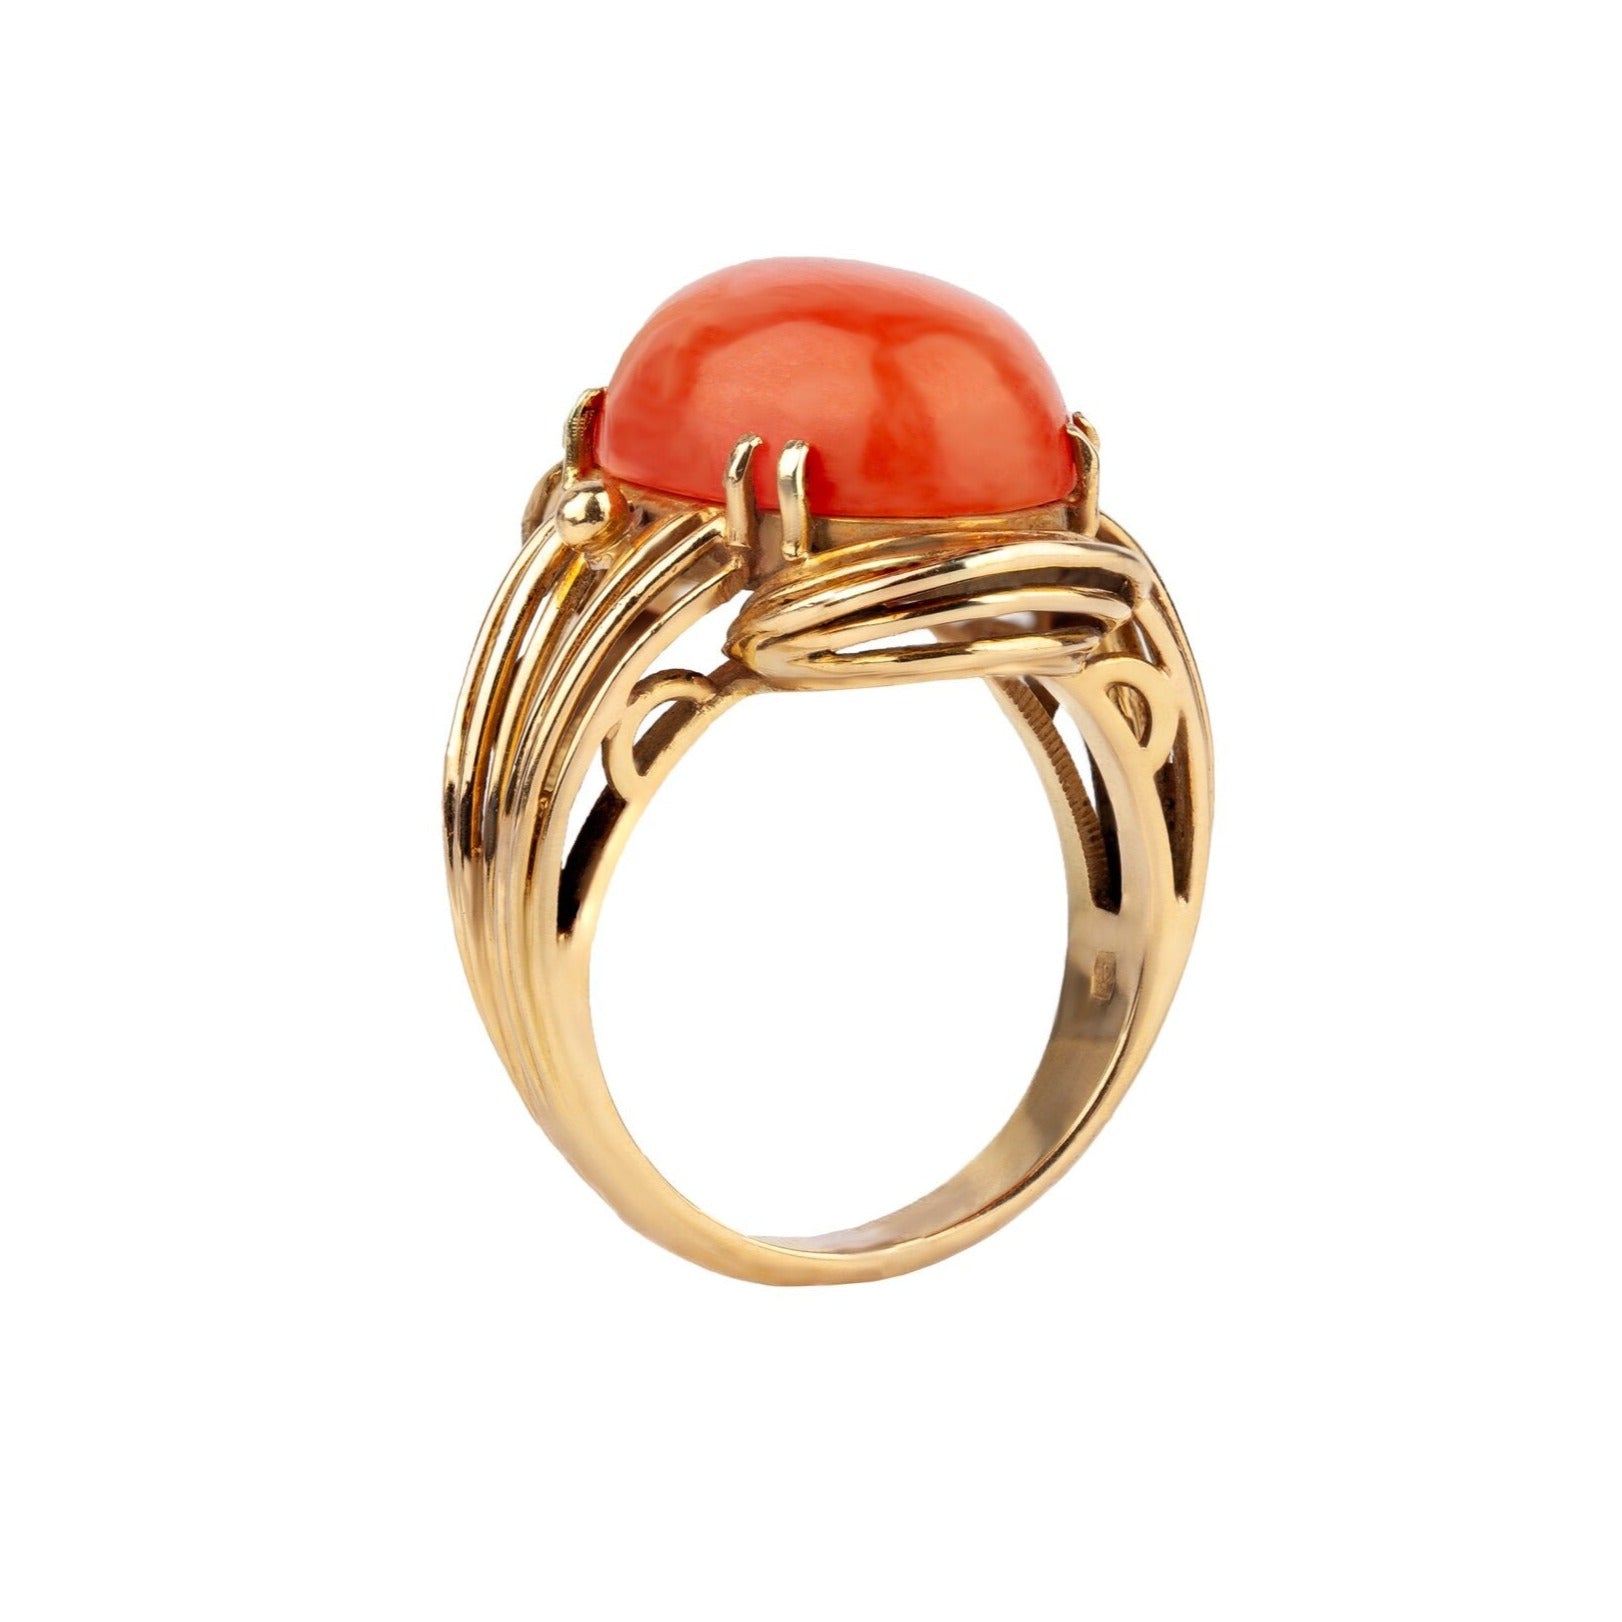 1970's coral cocktail ring